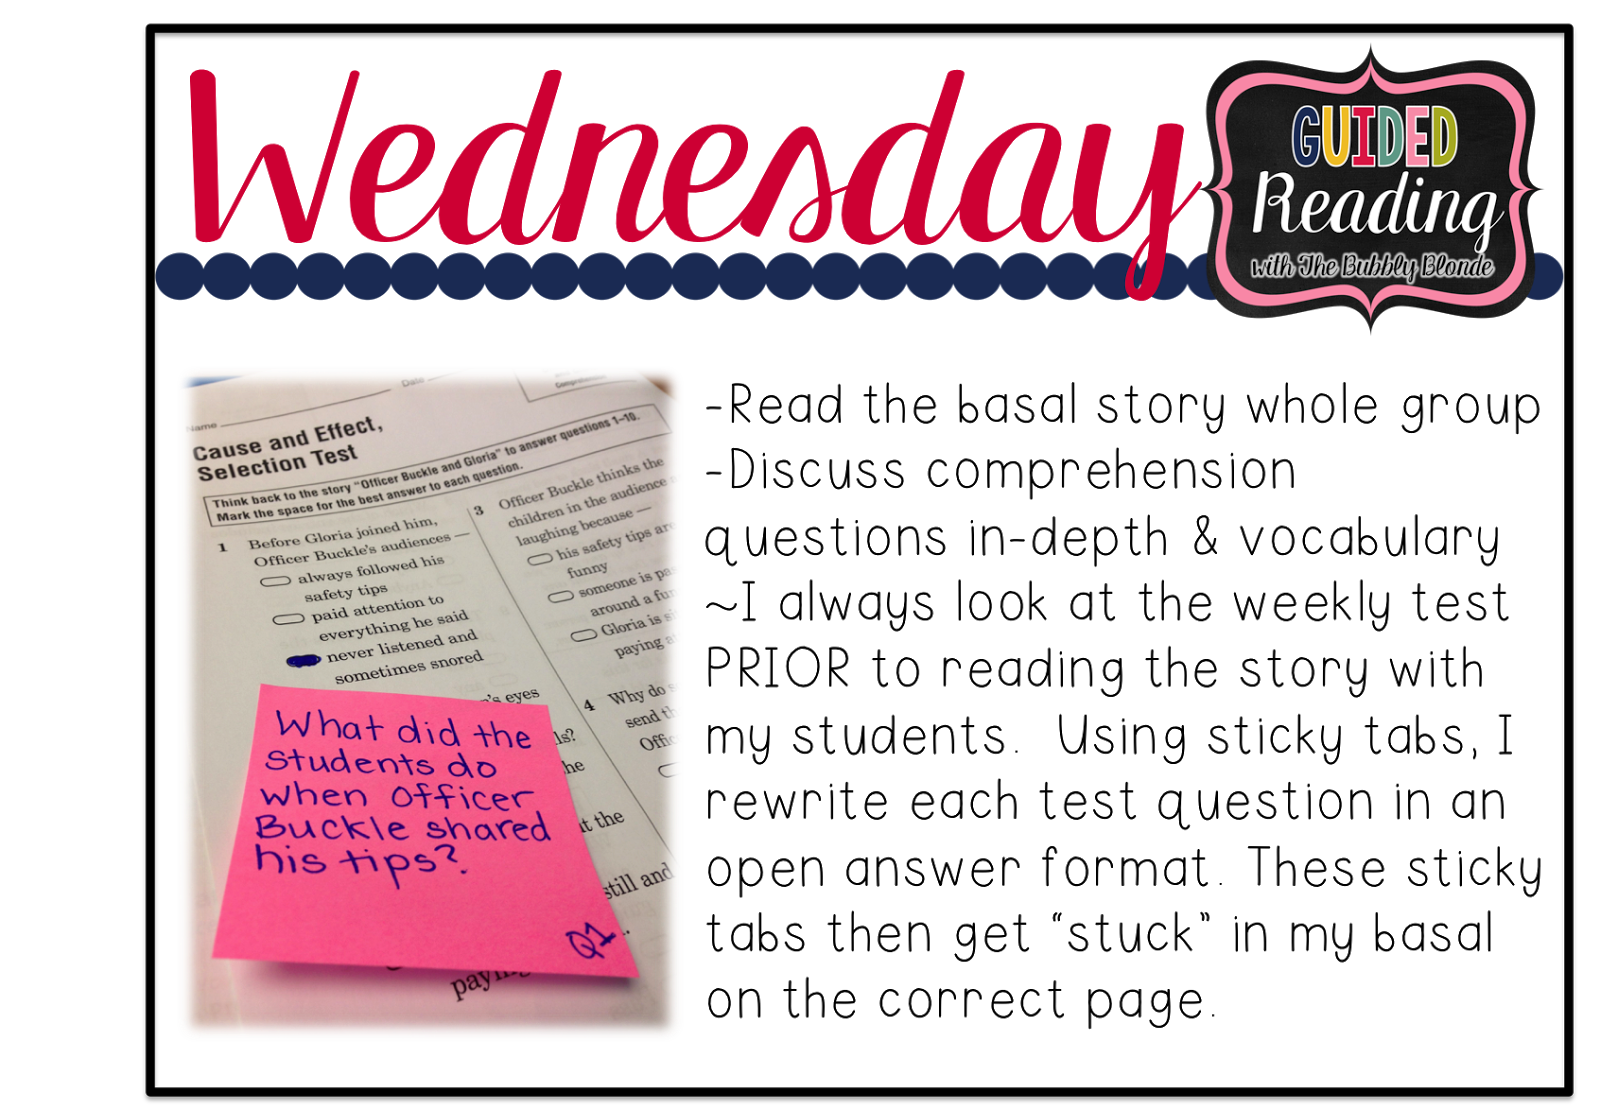 The week went BAM!  {All About Reading:  Wed-Thurs.}